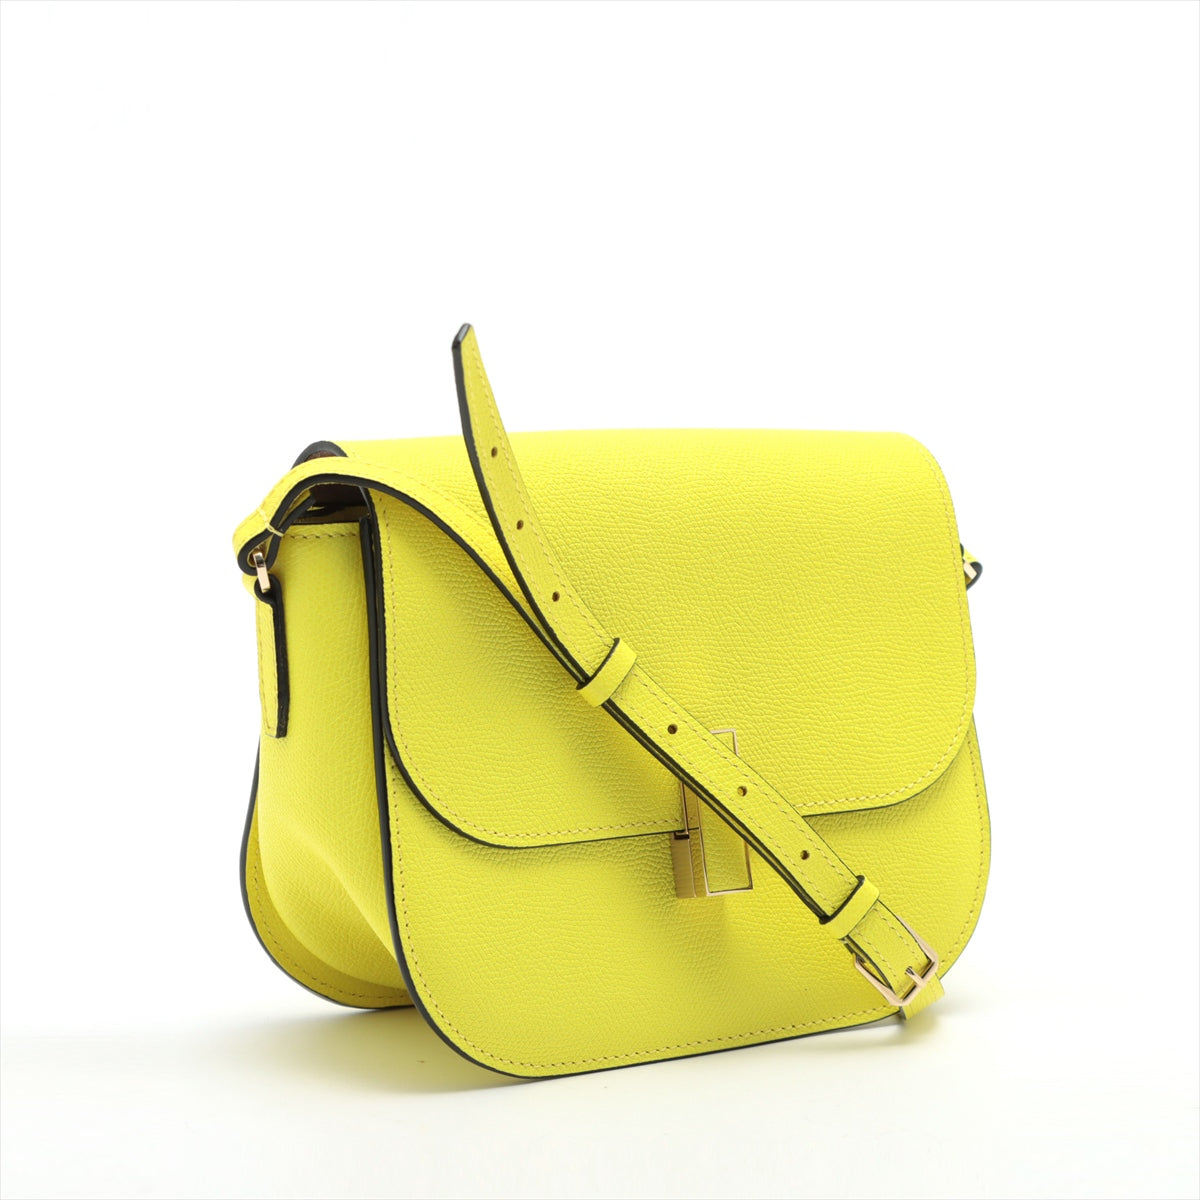 Valextra Iside Leather Shoulder bag Yellow There are loose metal fittings